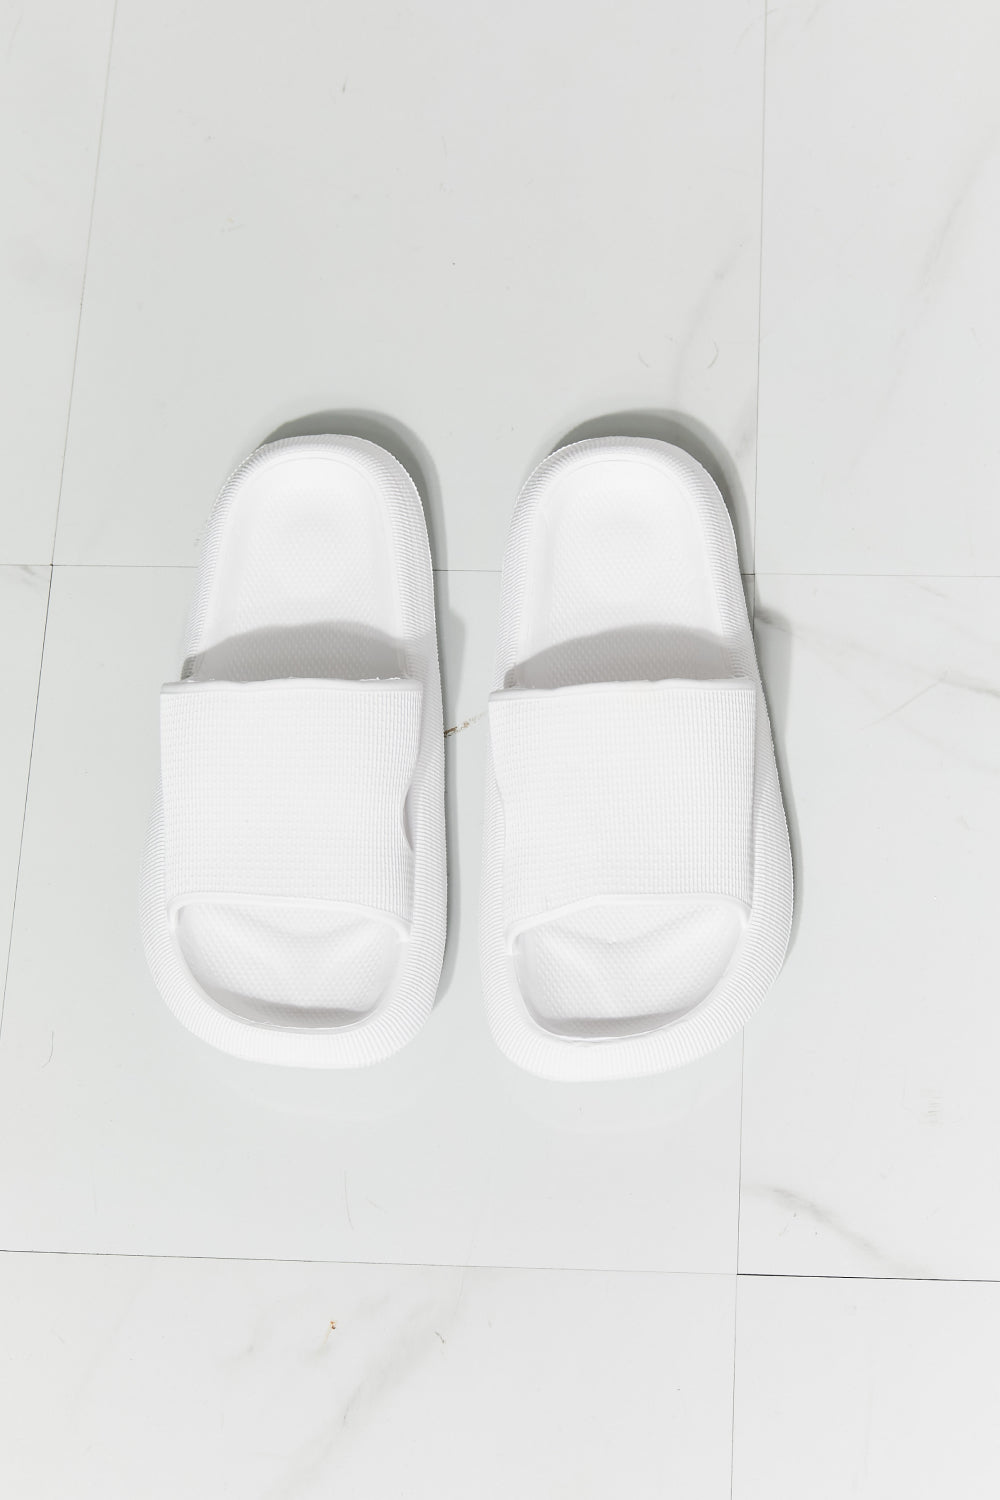 MMShoes Arms Around Me Open Toe Slide in White - BEAUTY COSMOTICS SHOP